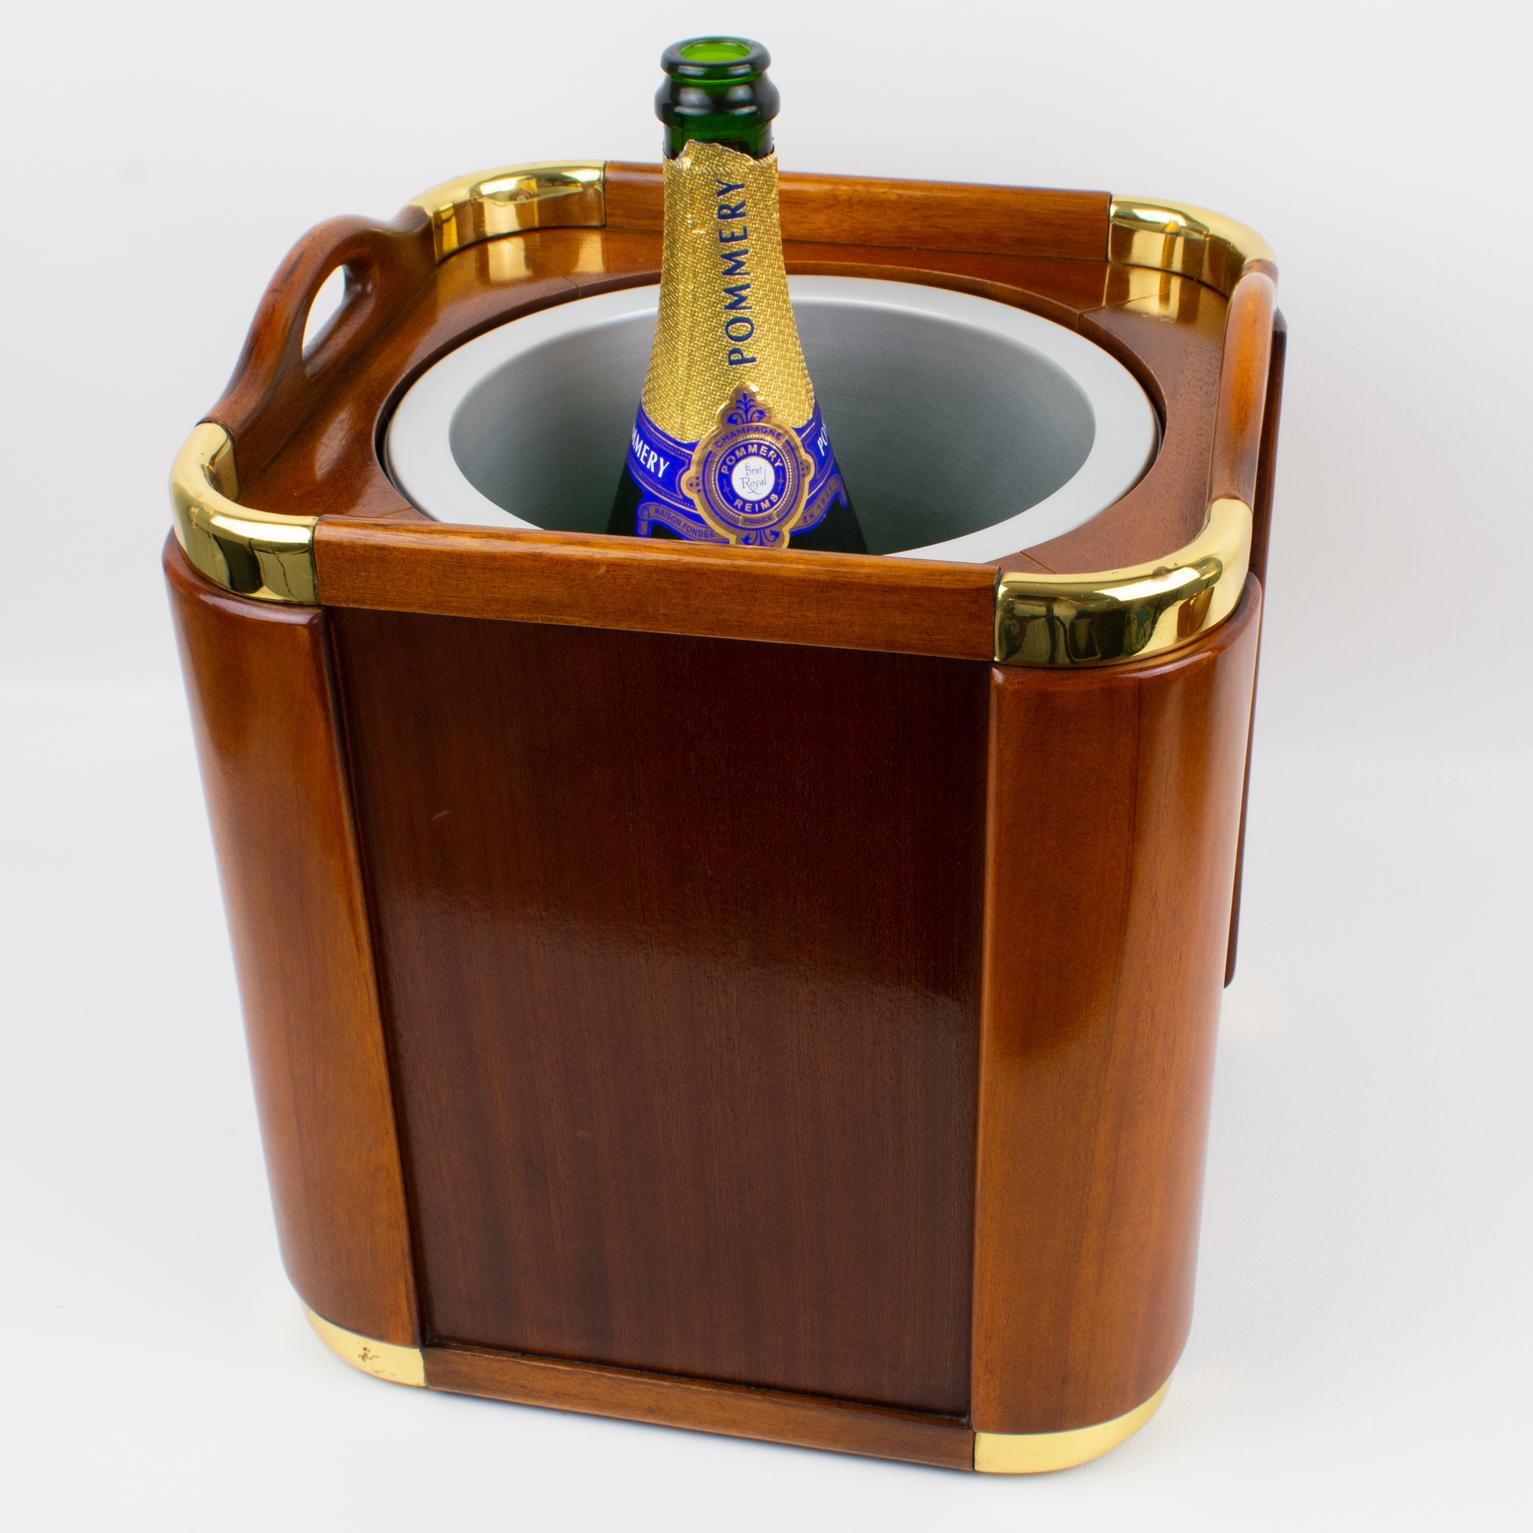 Valenti Spain 1960s Modernist Wood and Brass Ice Bucket Champagne Cooler 8